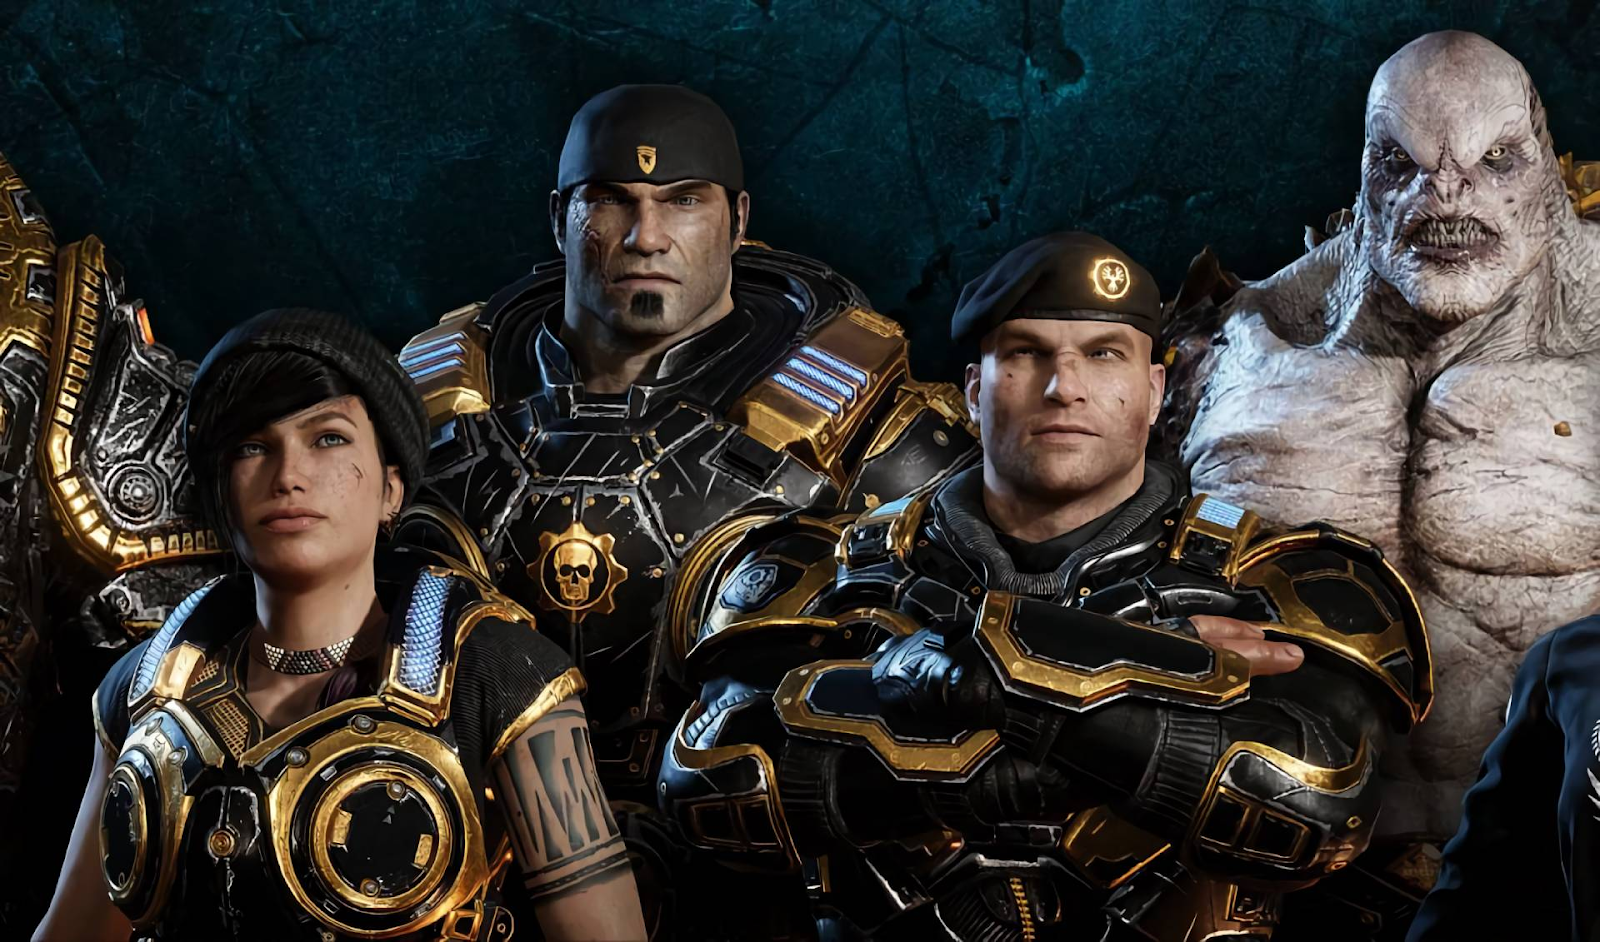 Characters from Gears of War created on Unreal Engine